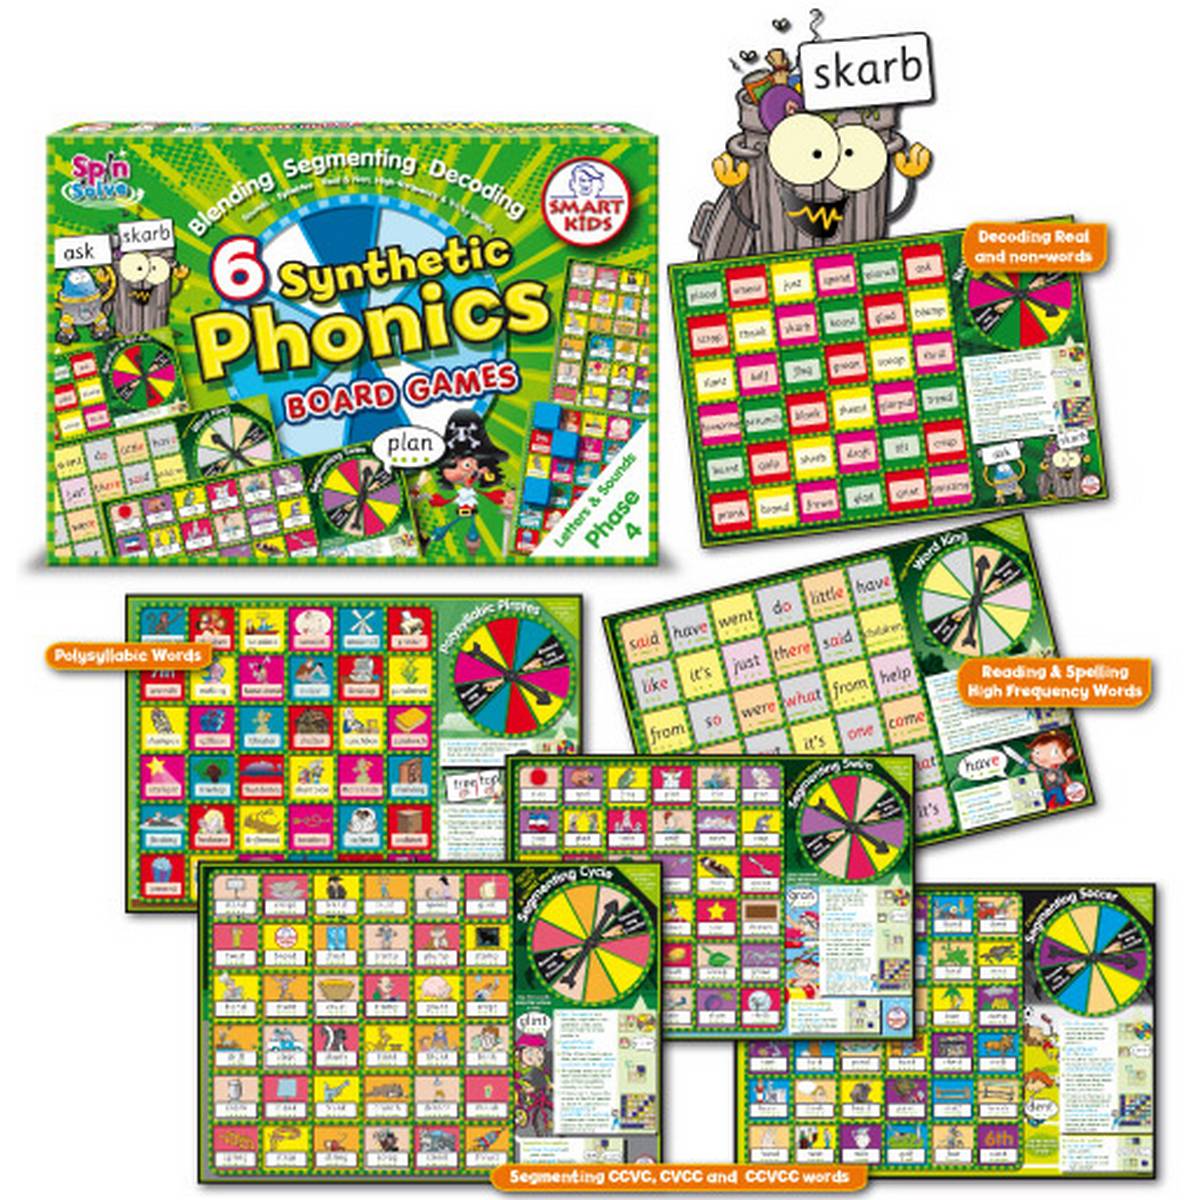 Synthetic Phonics Boards Games Age 5-7 Set of 6